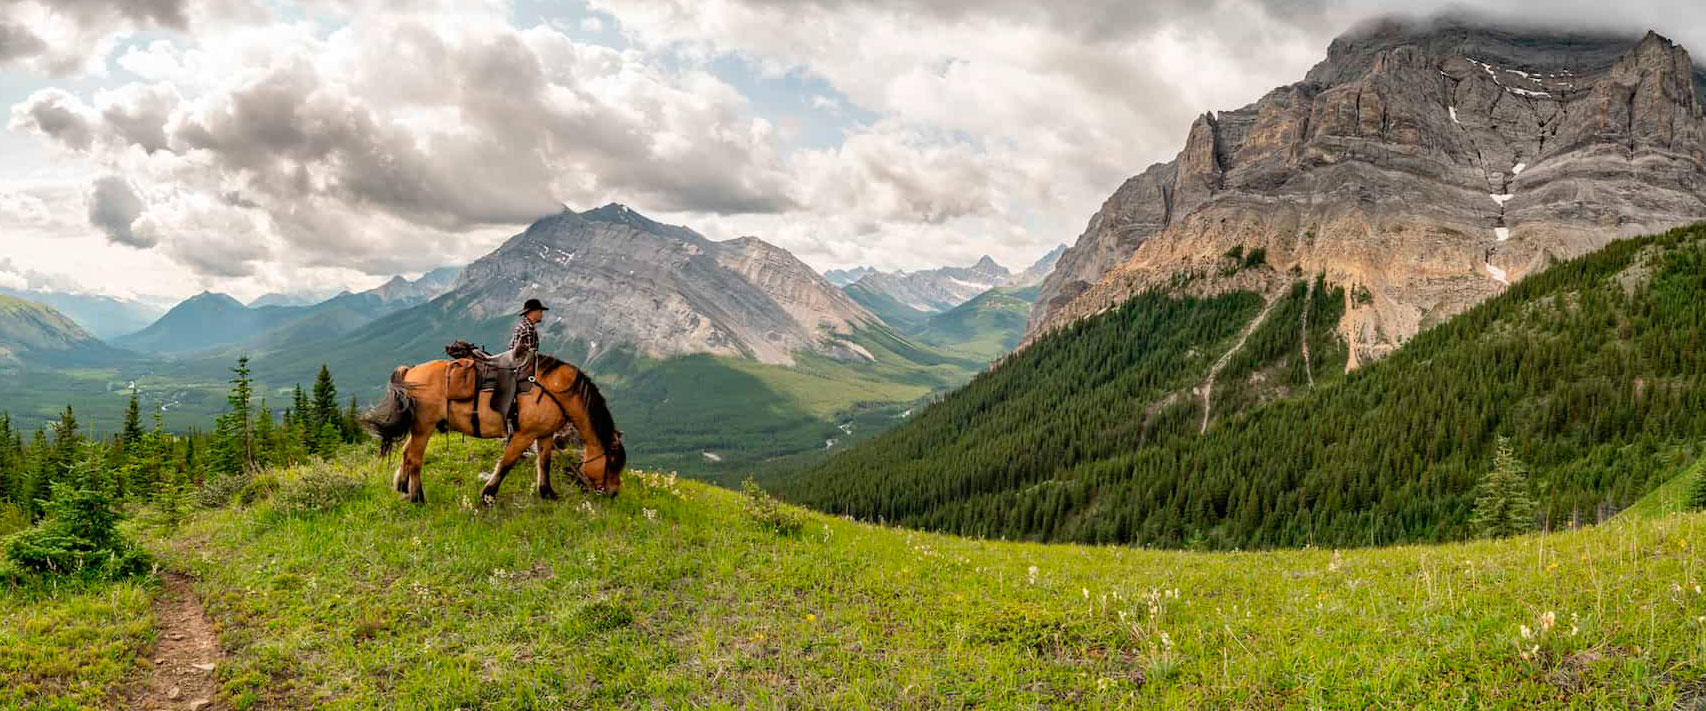 Hourly rides with Banff Trail Riders